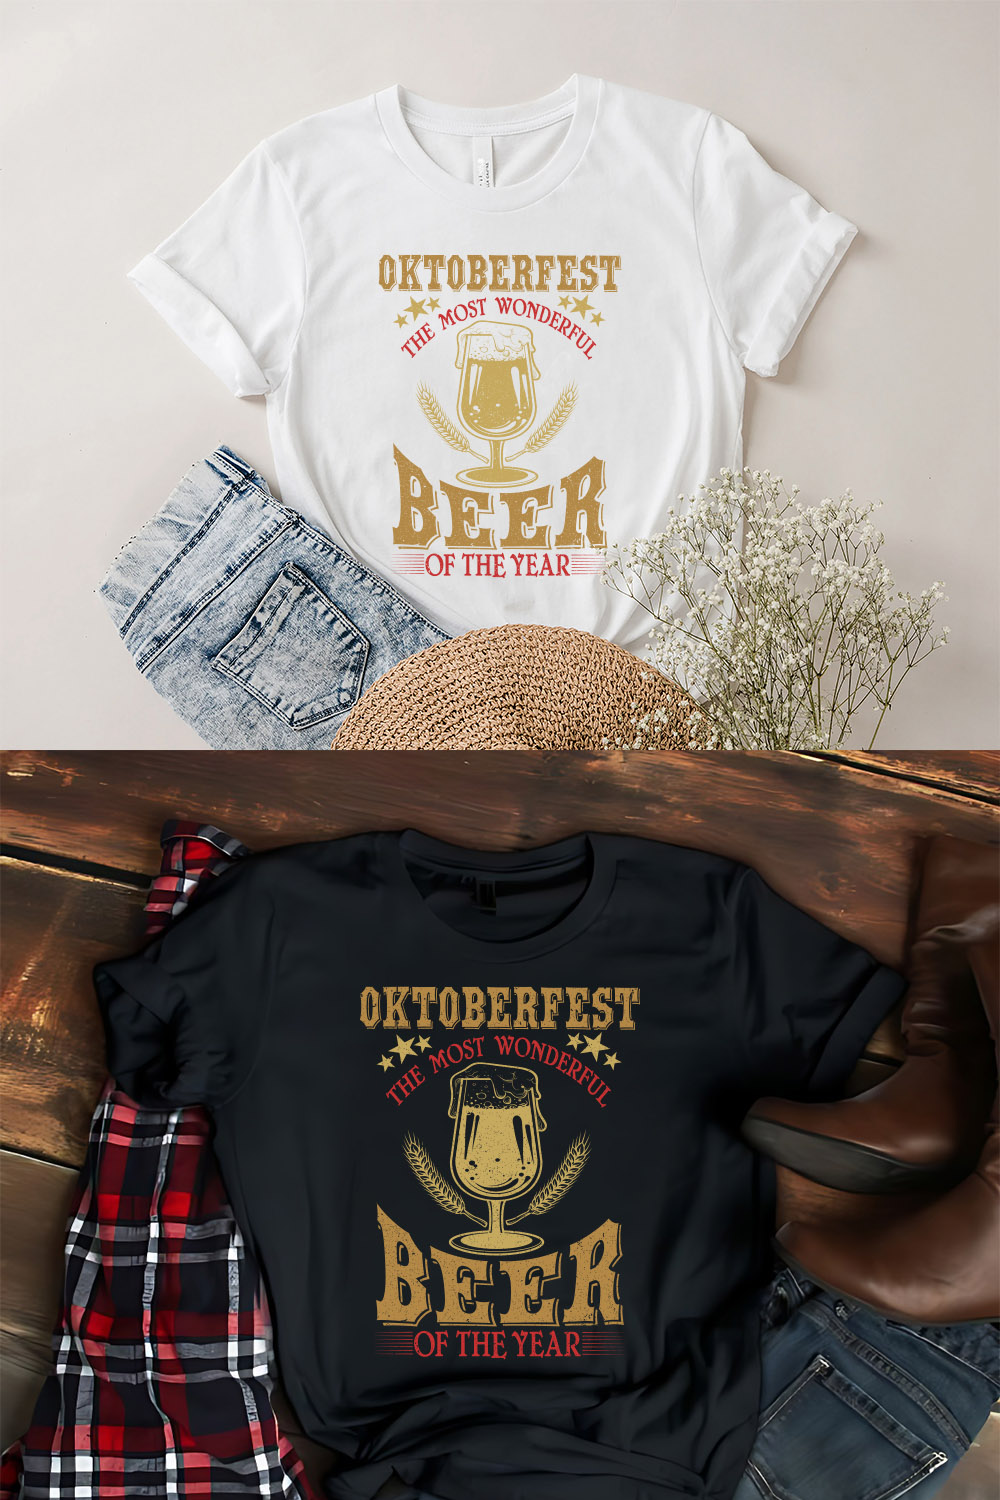 Oktoberfest the most wonderful beer of the year typography t shirt design pinterest preview image.